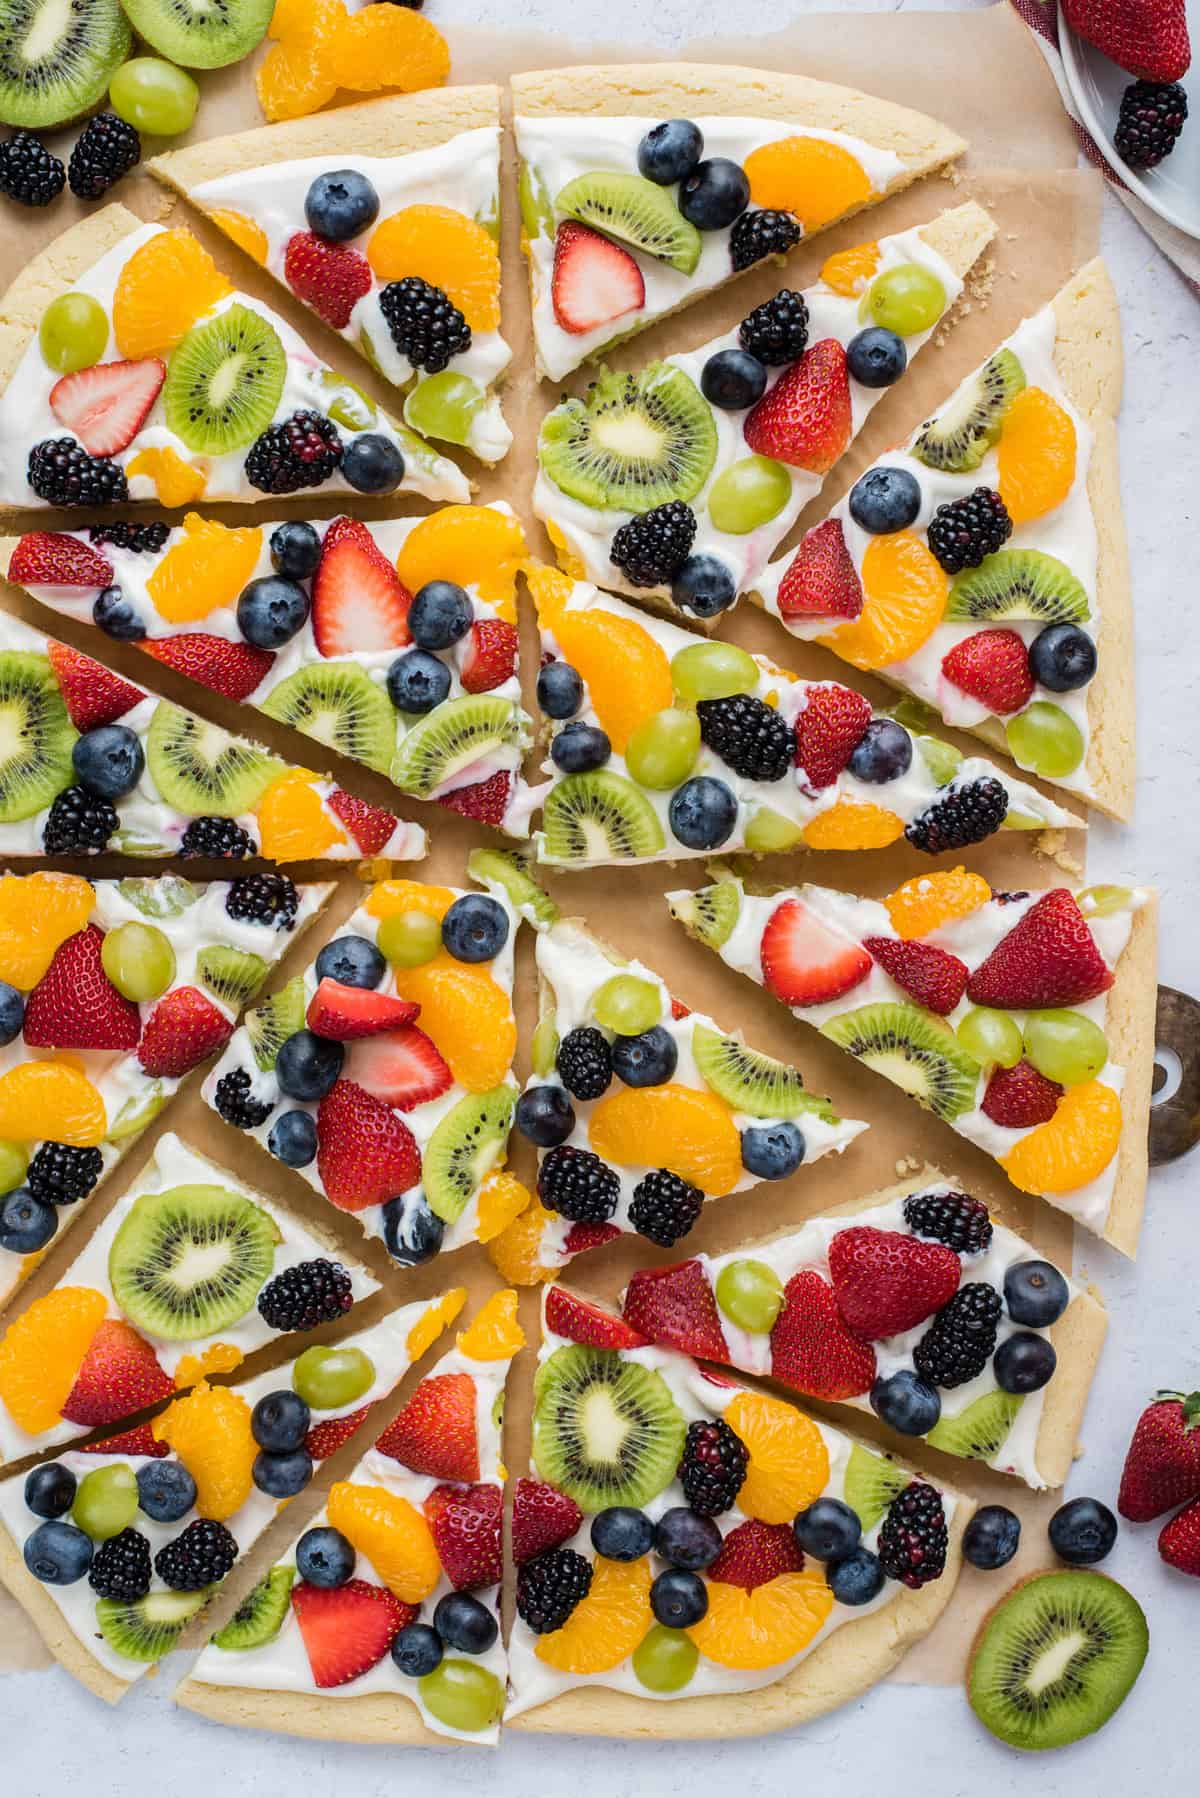 a whole fruit pizza cut into triangle slices with strawberries, blueberries, mandarin oranges, kiwis and grapes on brown parchment paper